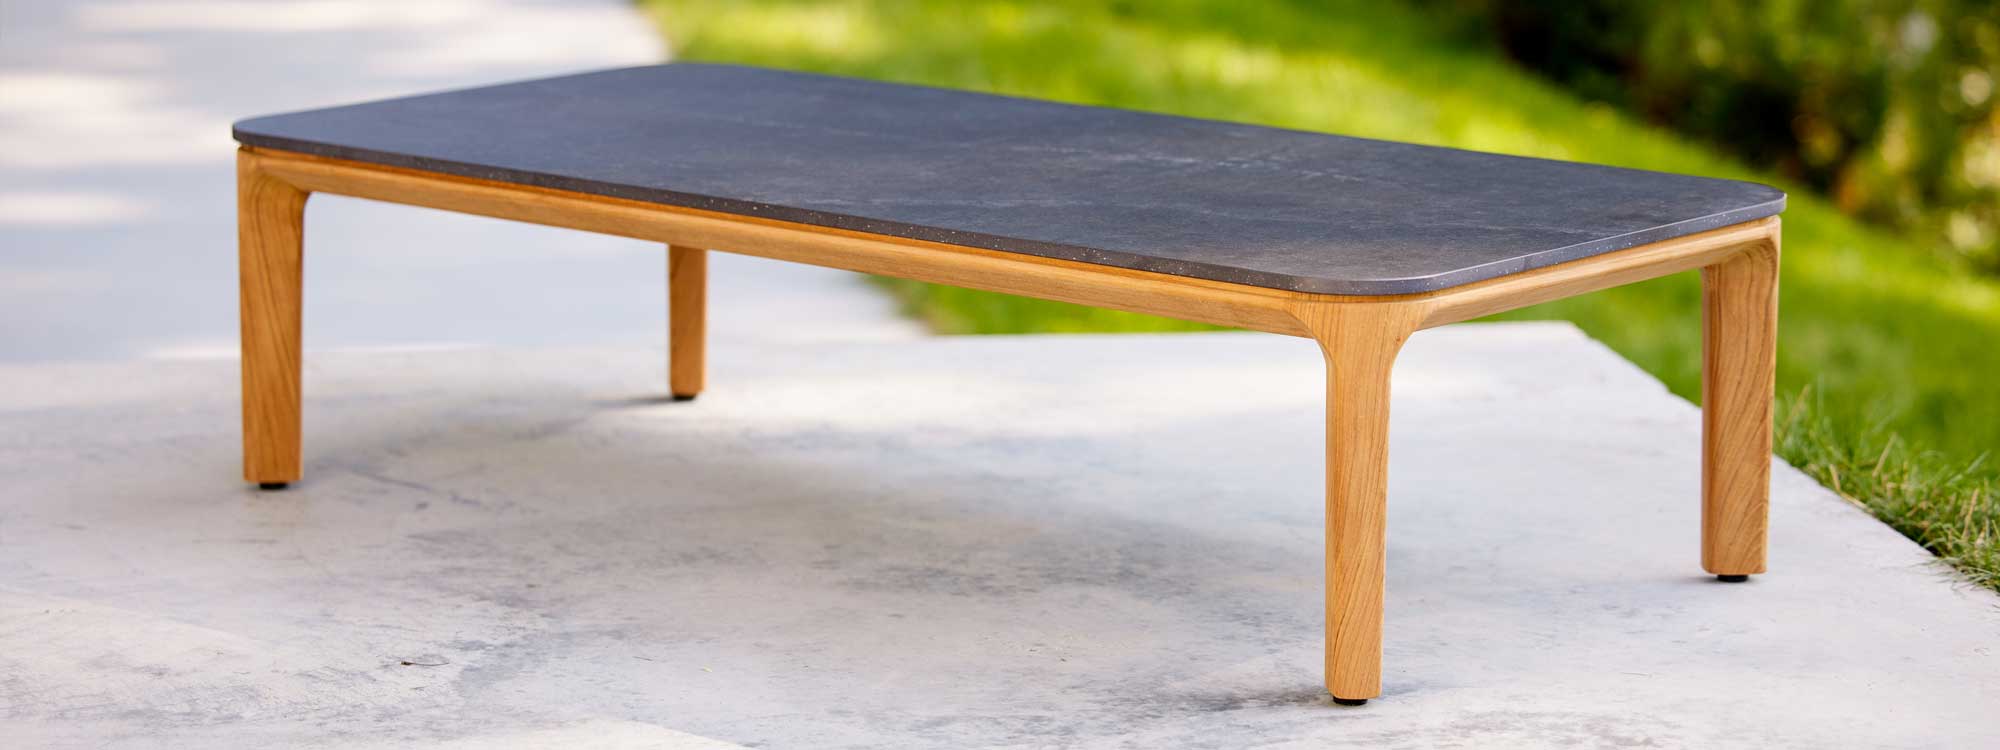 Image of Aspect rectangular low table with teak legs and fossil-black ceramic top by Cane-line garden furniture